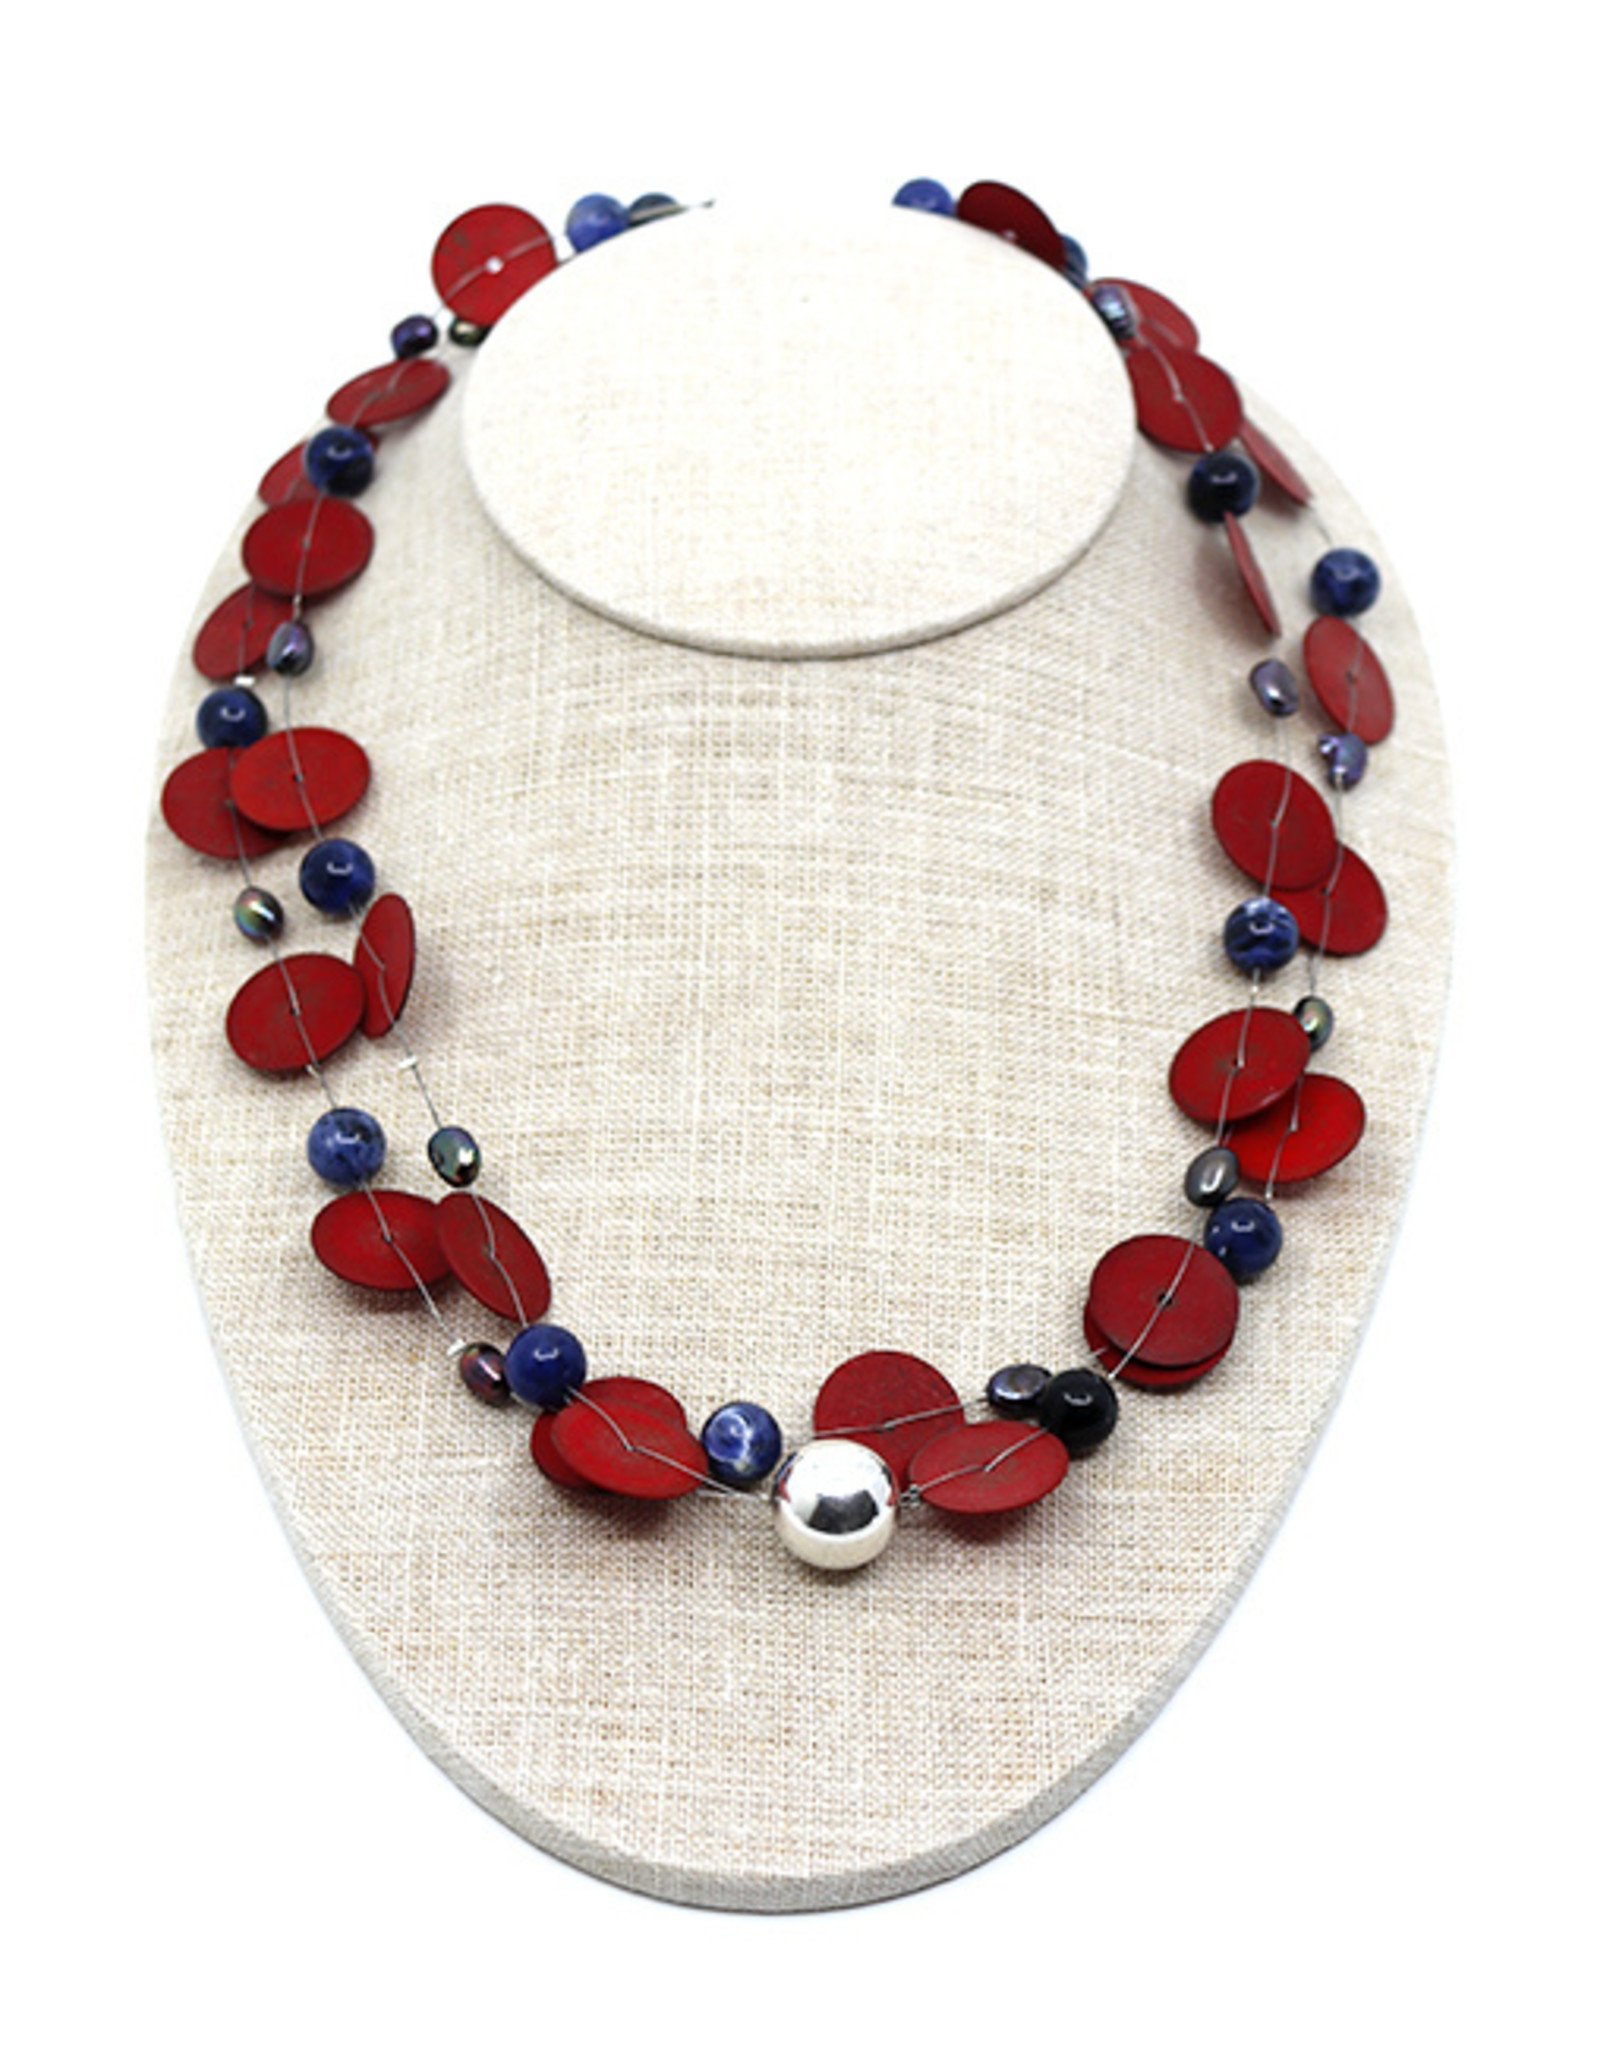 Neckl. Sterl, sodalite, pearl + man made material